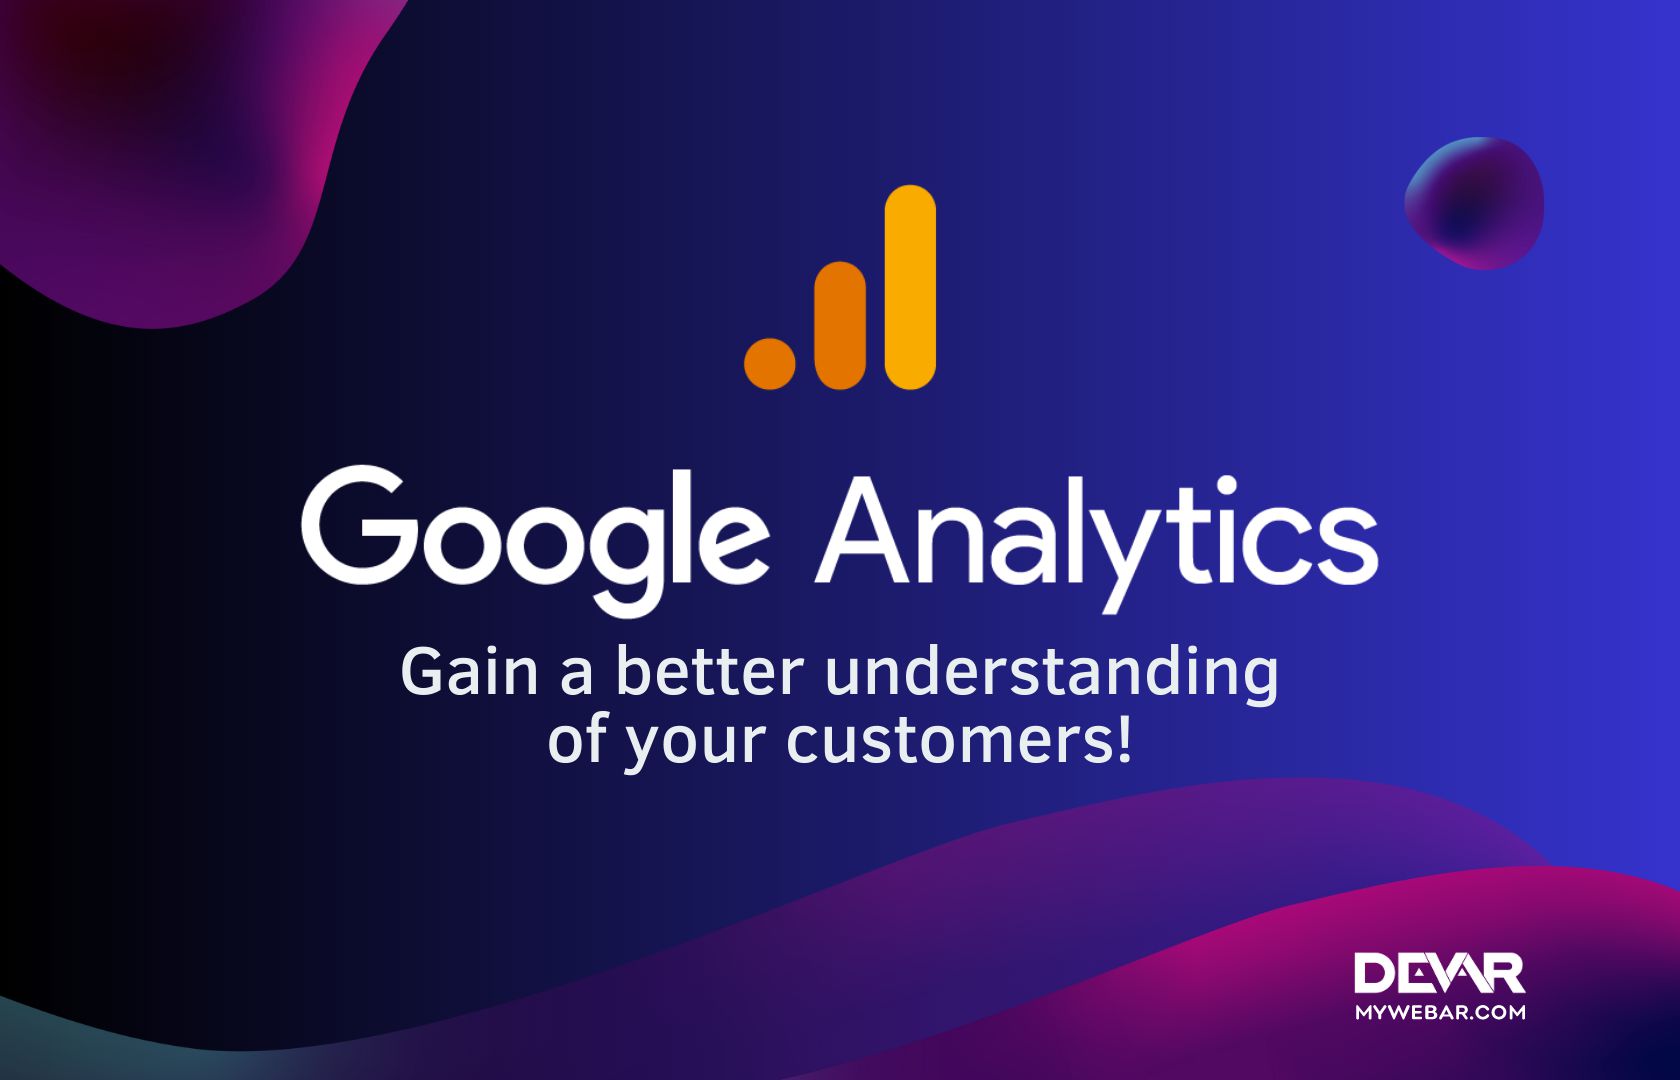 Gain a Better Understanding of Your Customers with Google Analytics